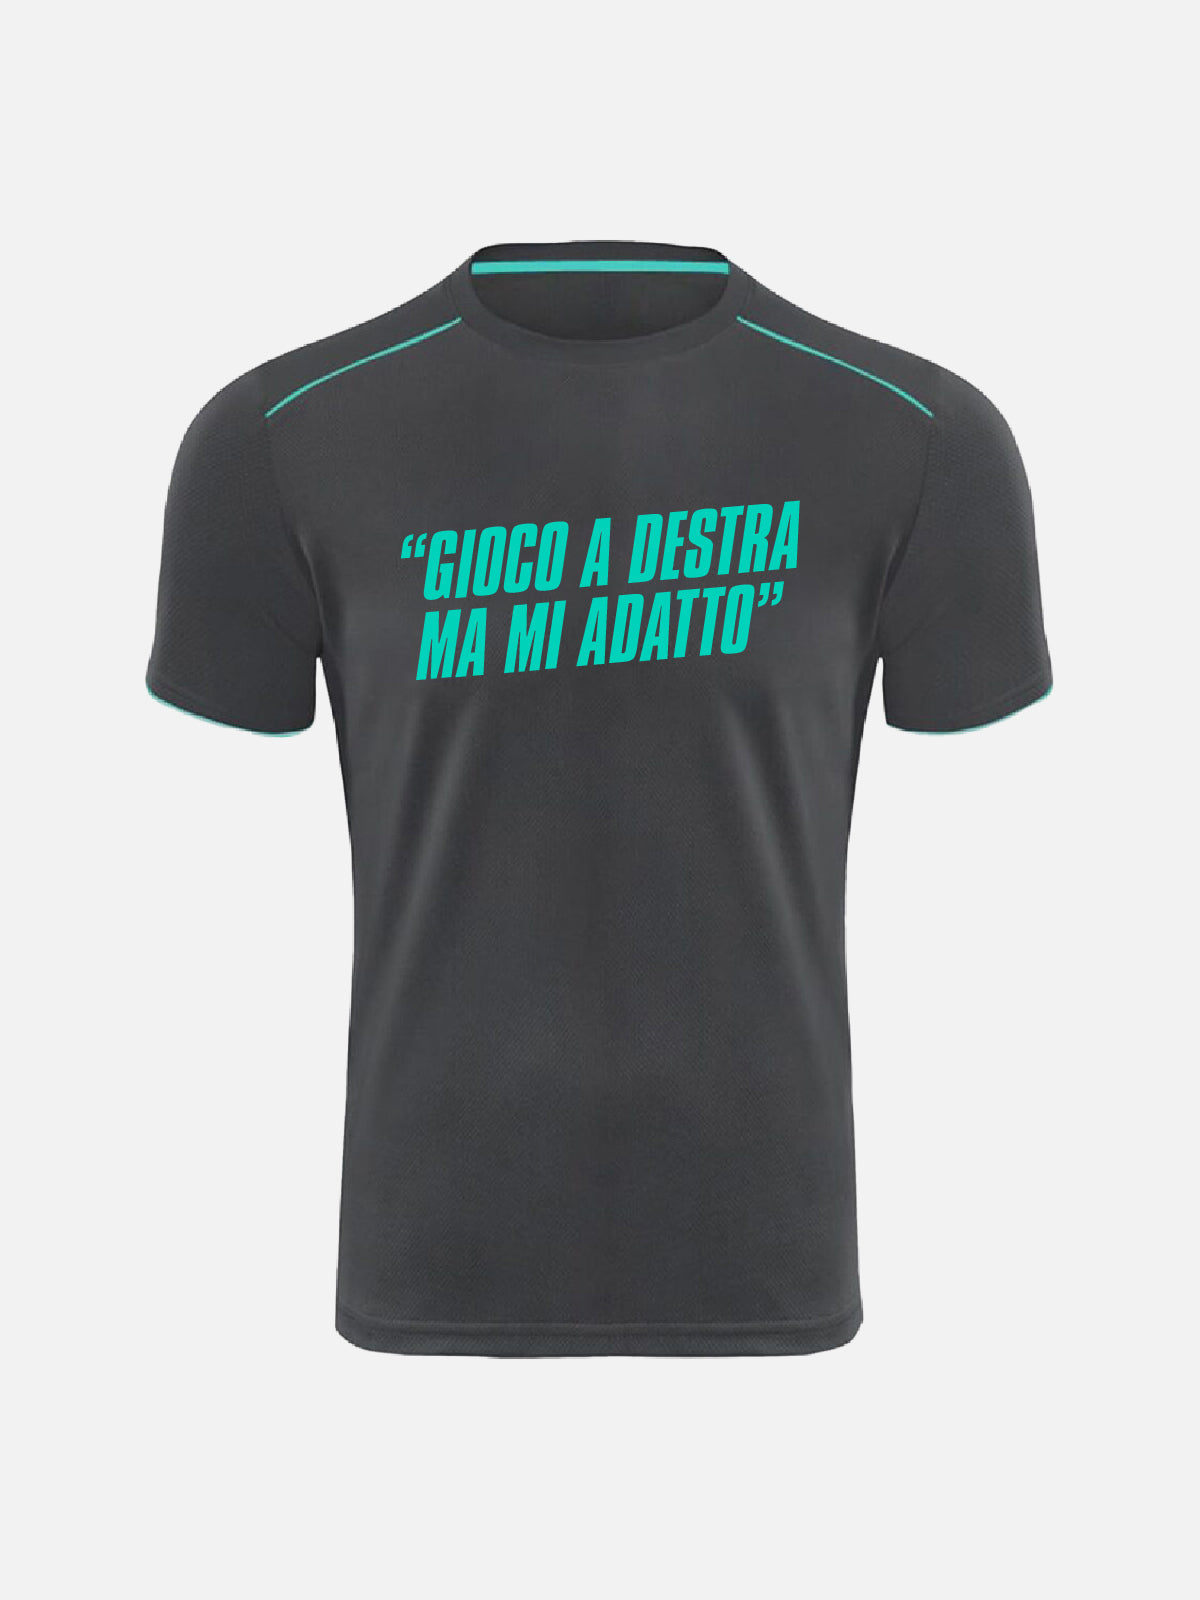 Personalized T-shirt -"I Play Right But I Adapt"